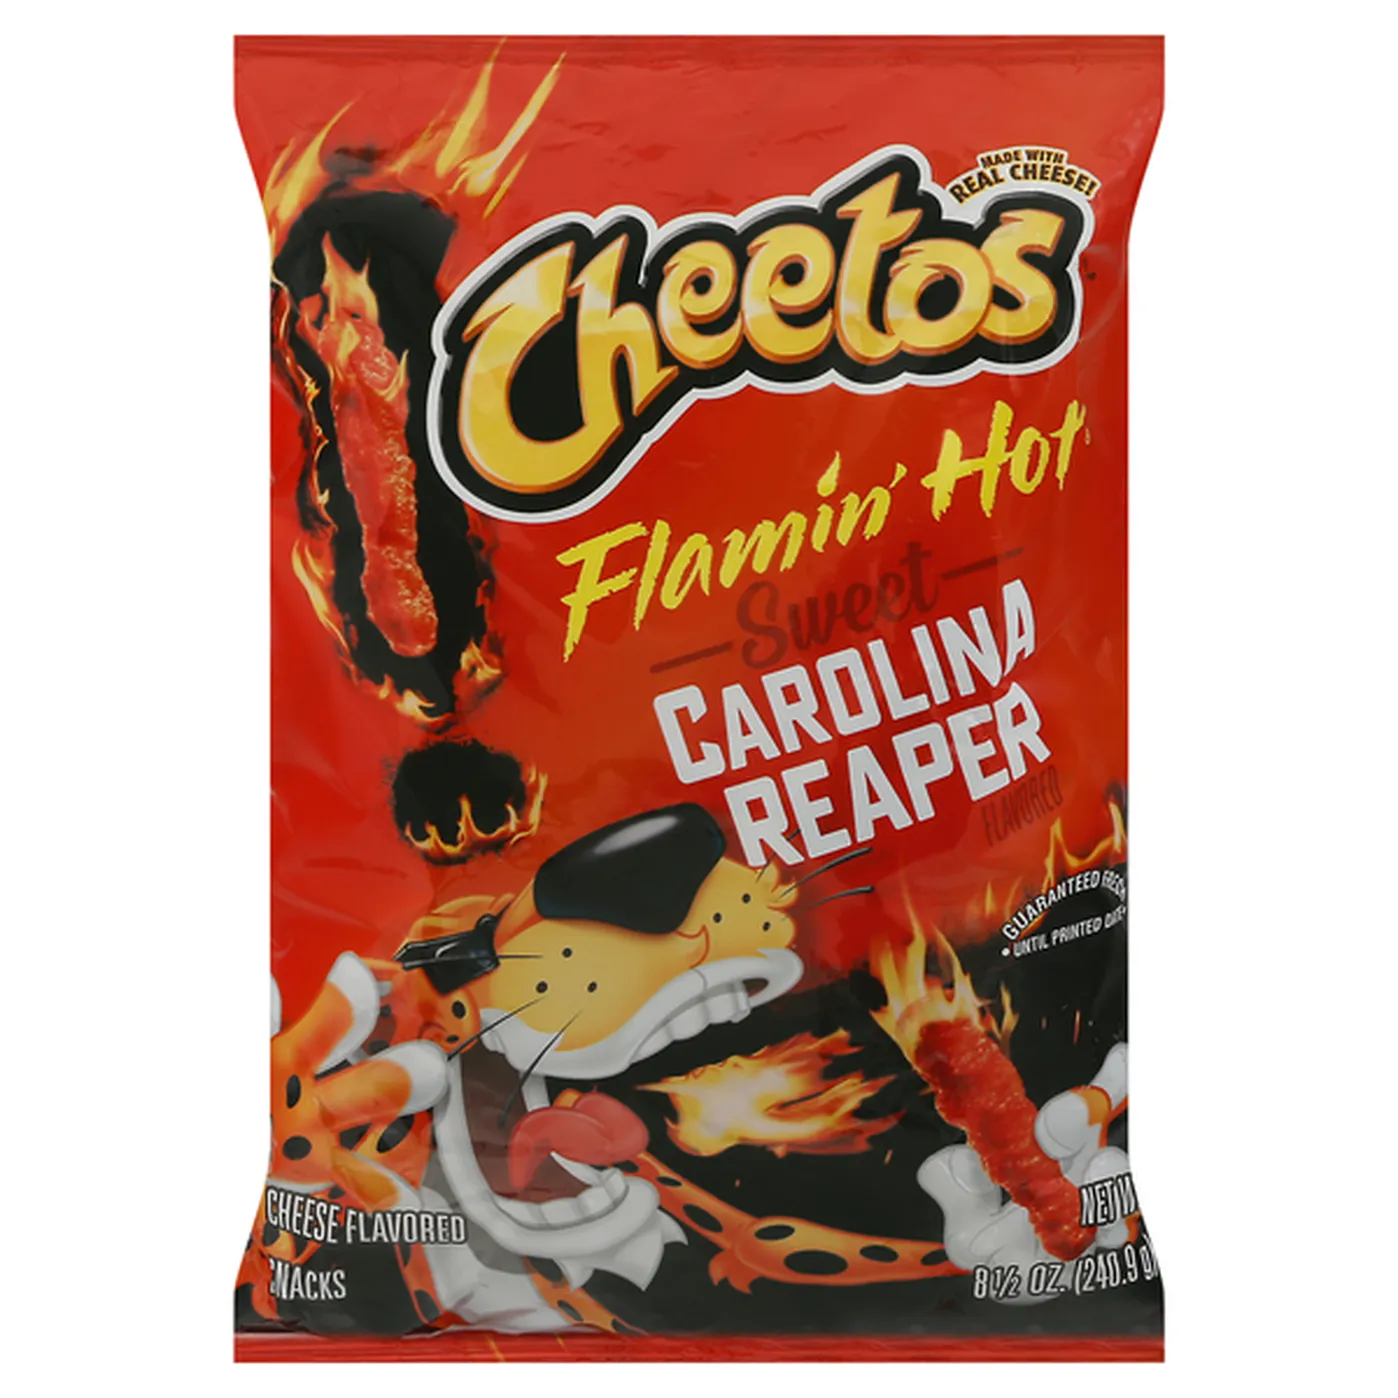 Cheetos Cheese Snacks, Sweet Carolina Reaper (8.5 oz) Delivery or